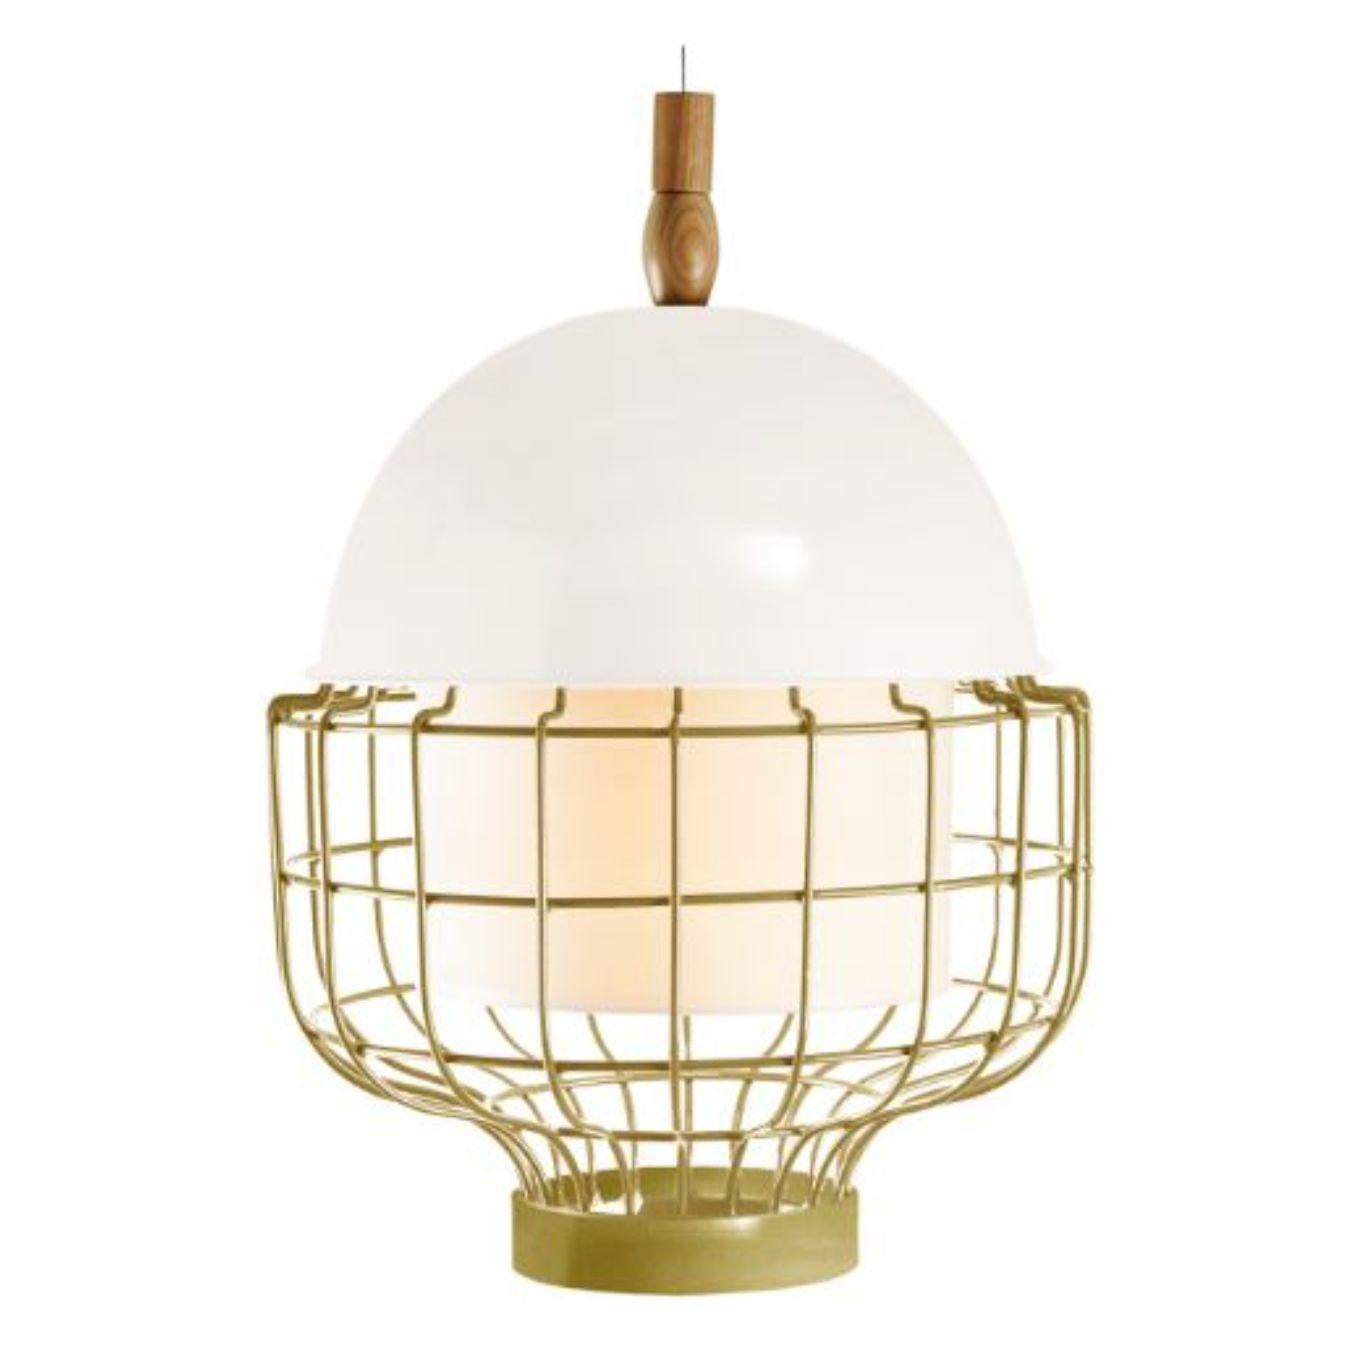 Brass Jade Magnolia III Suspension Lamp with Brass Ring by Dooq For Sale 4